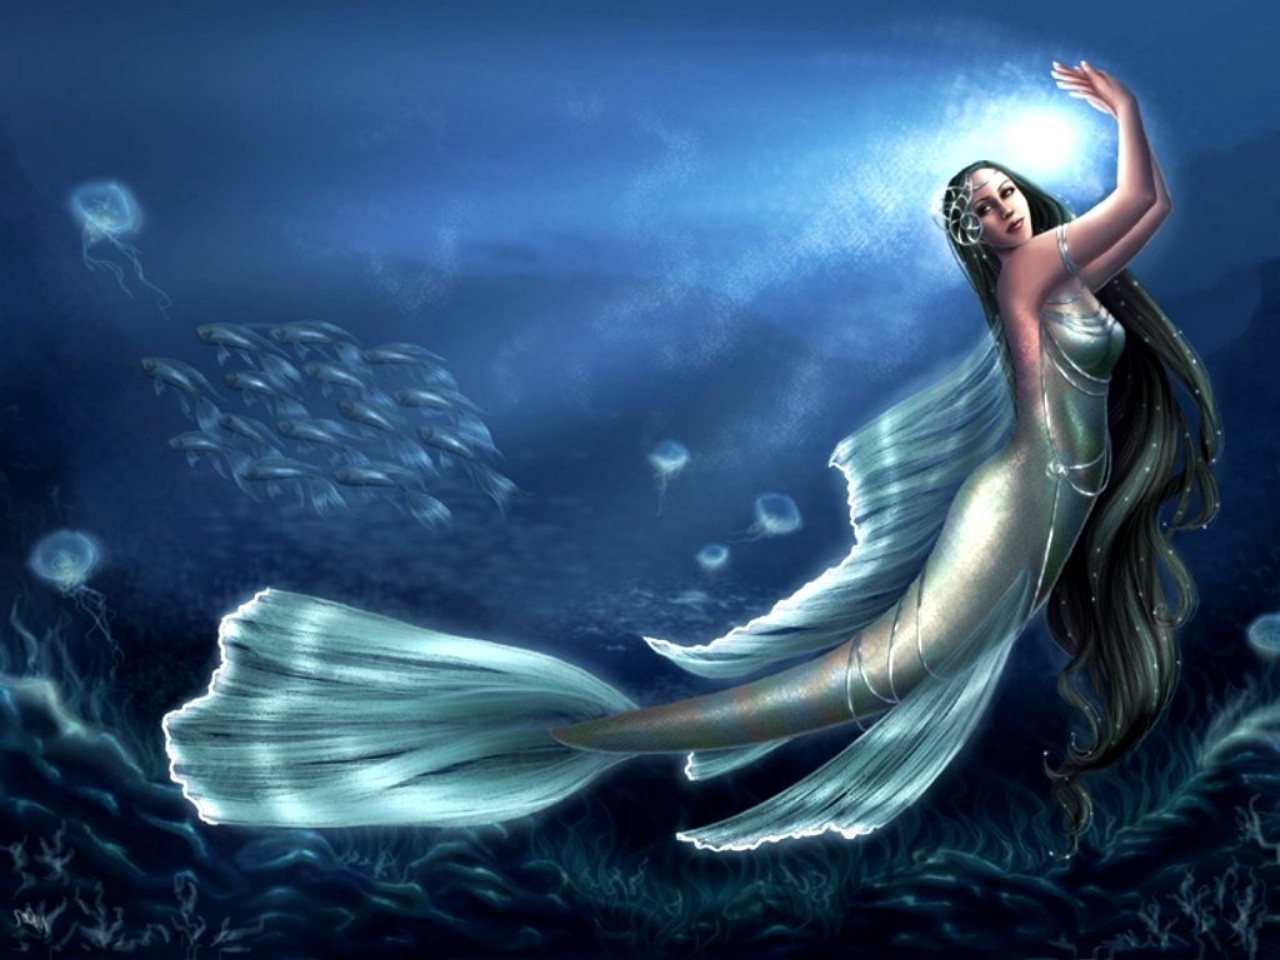 Download 1280x960 Fantasy – Mermaid Wallpapers and Backgrounds